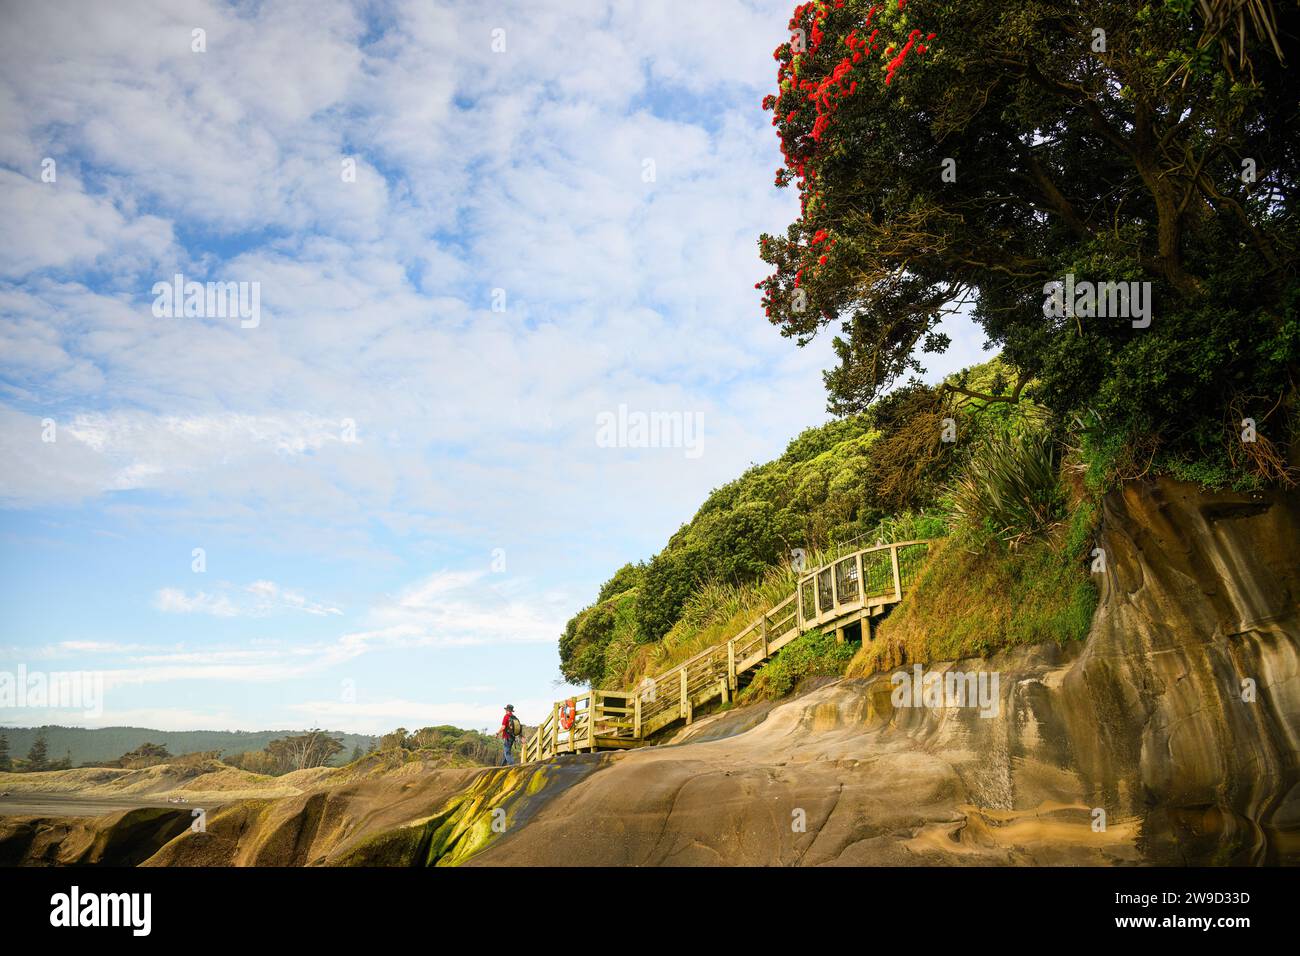 Pohutukawa trees in bloom at Muriwai Beach. People walking on the rocks. Auckland. Stock Photo